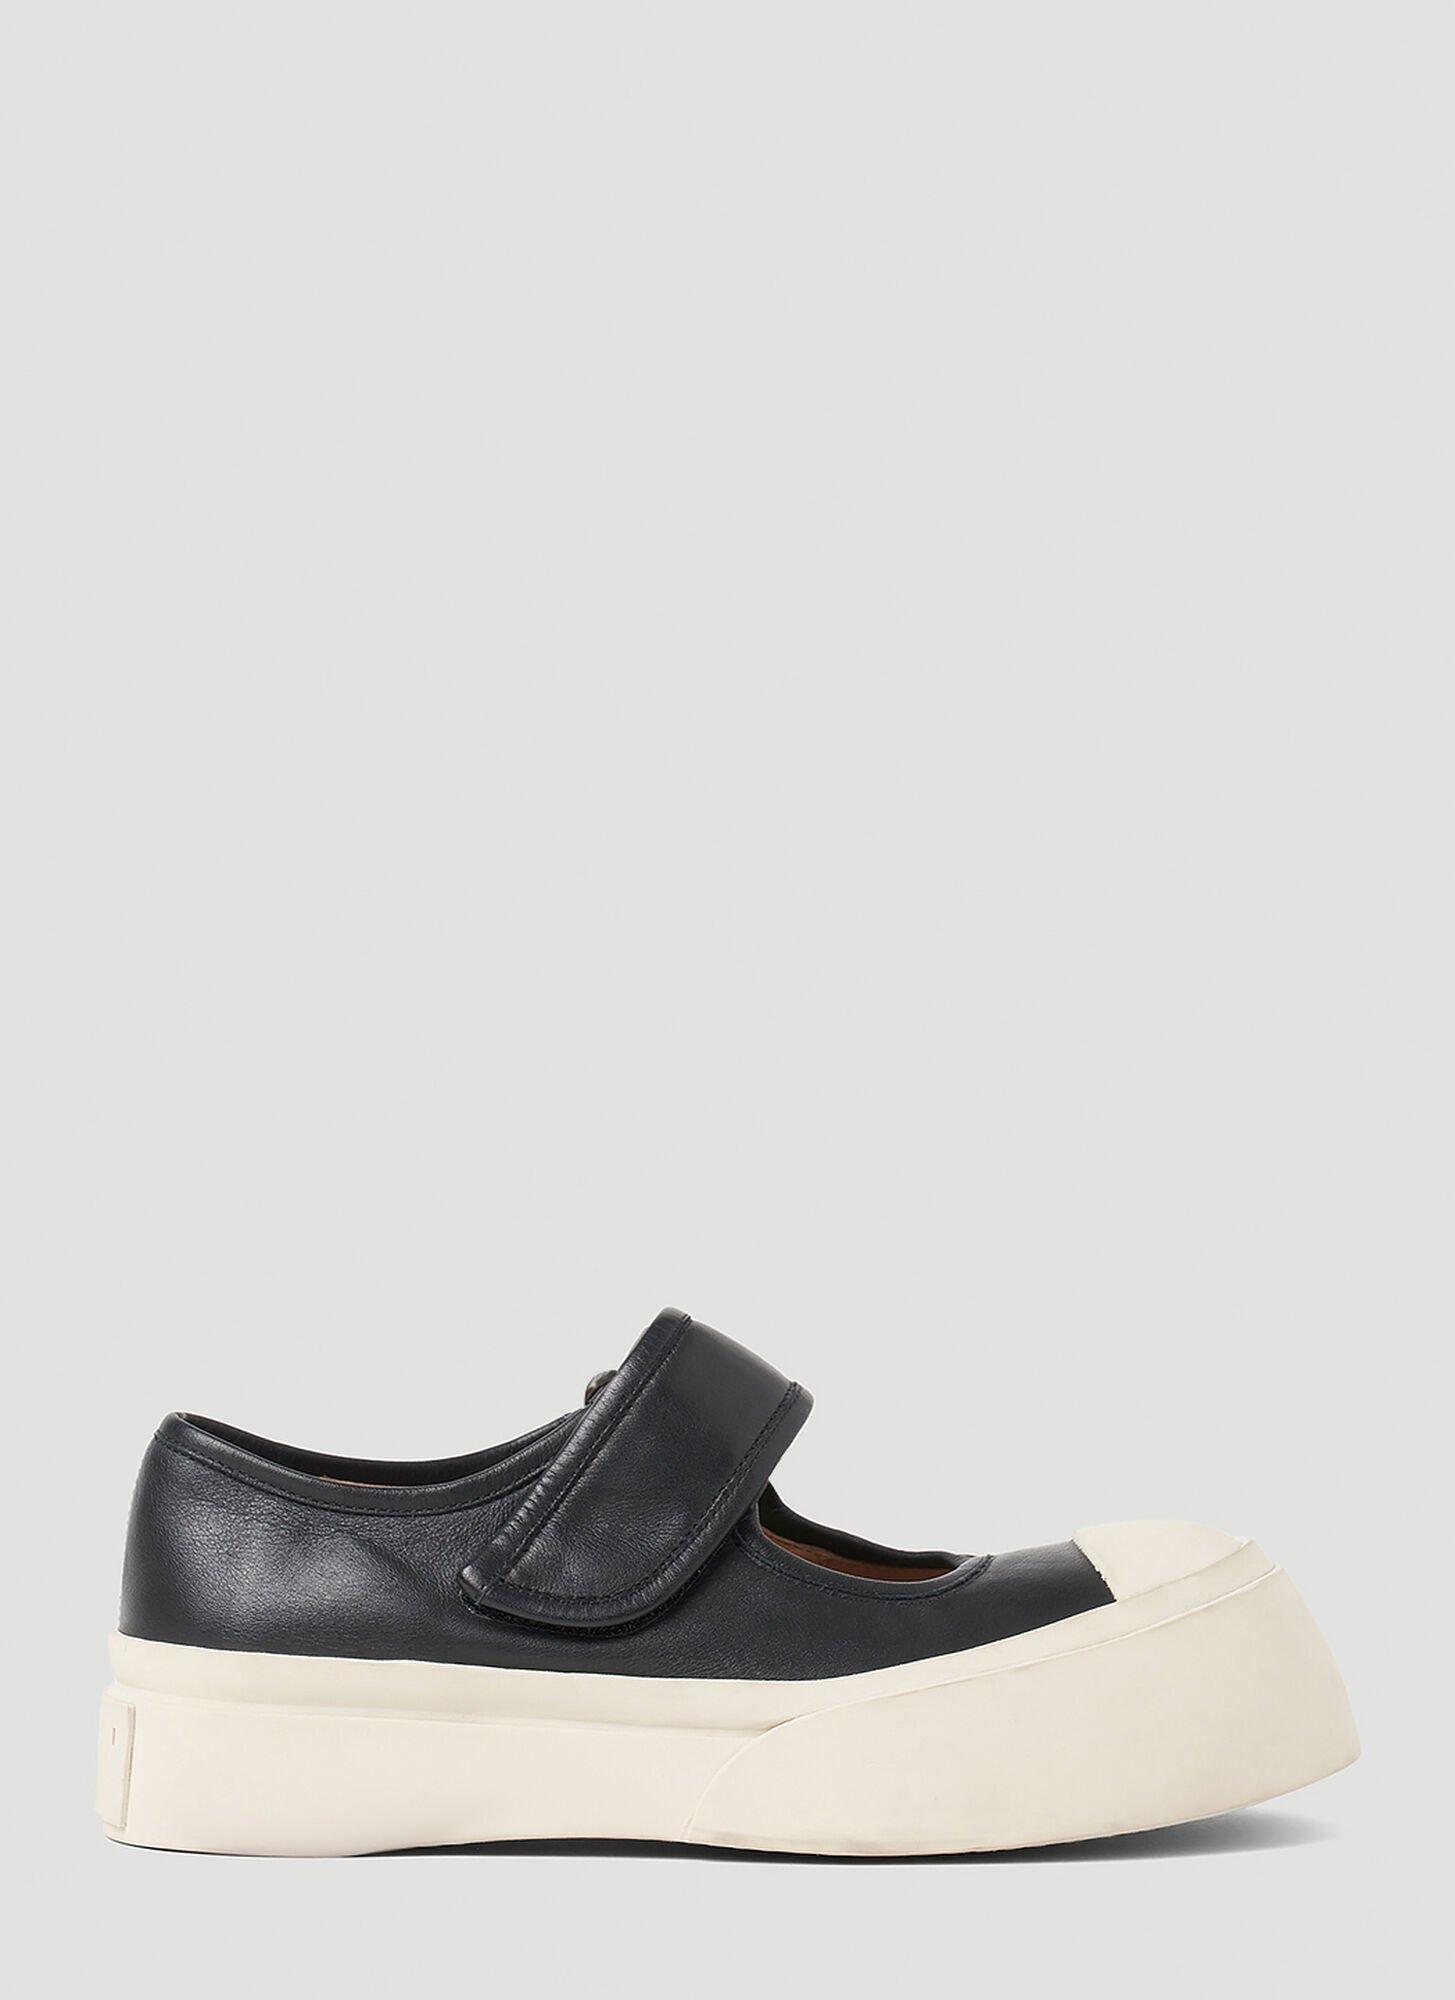 Marni Mary Jane Pablo Flats in White | Lyst